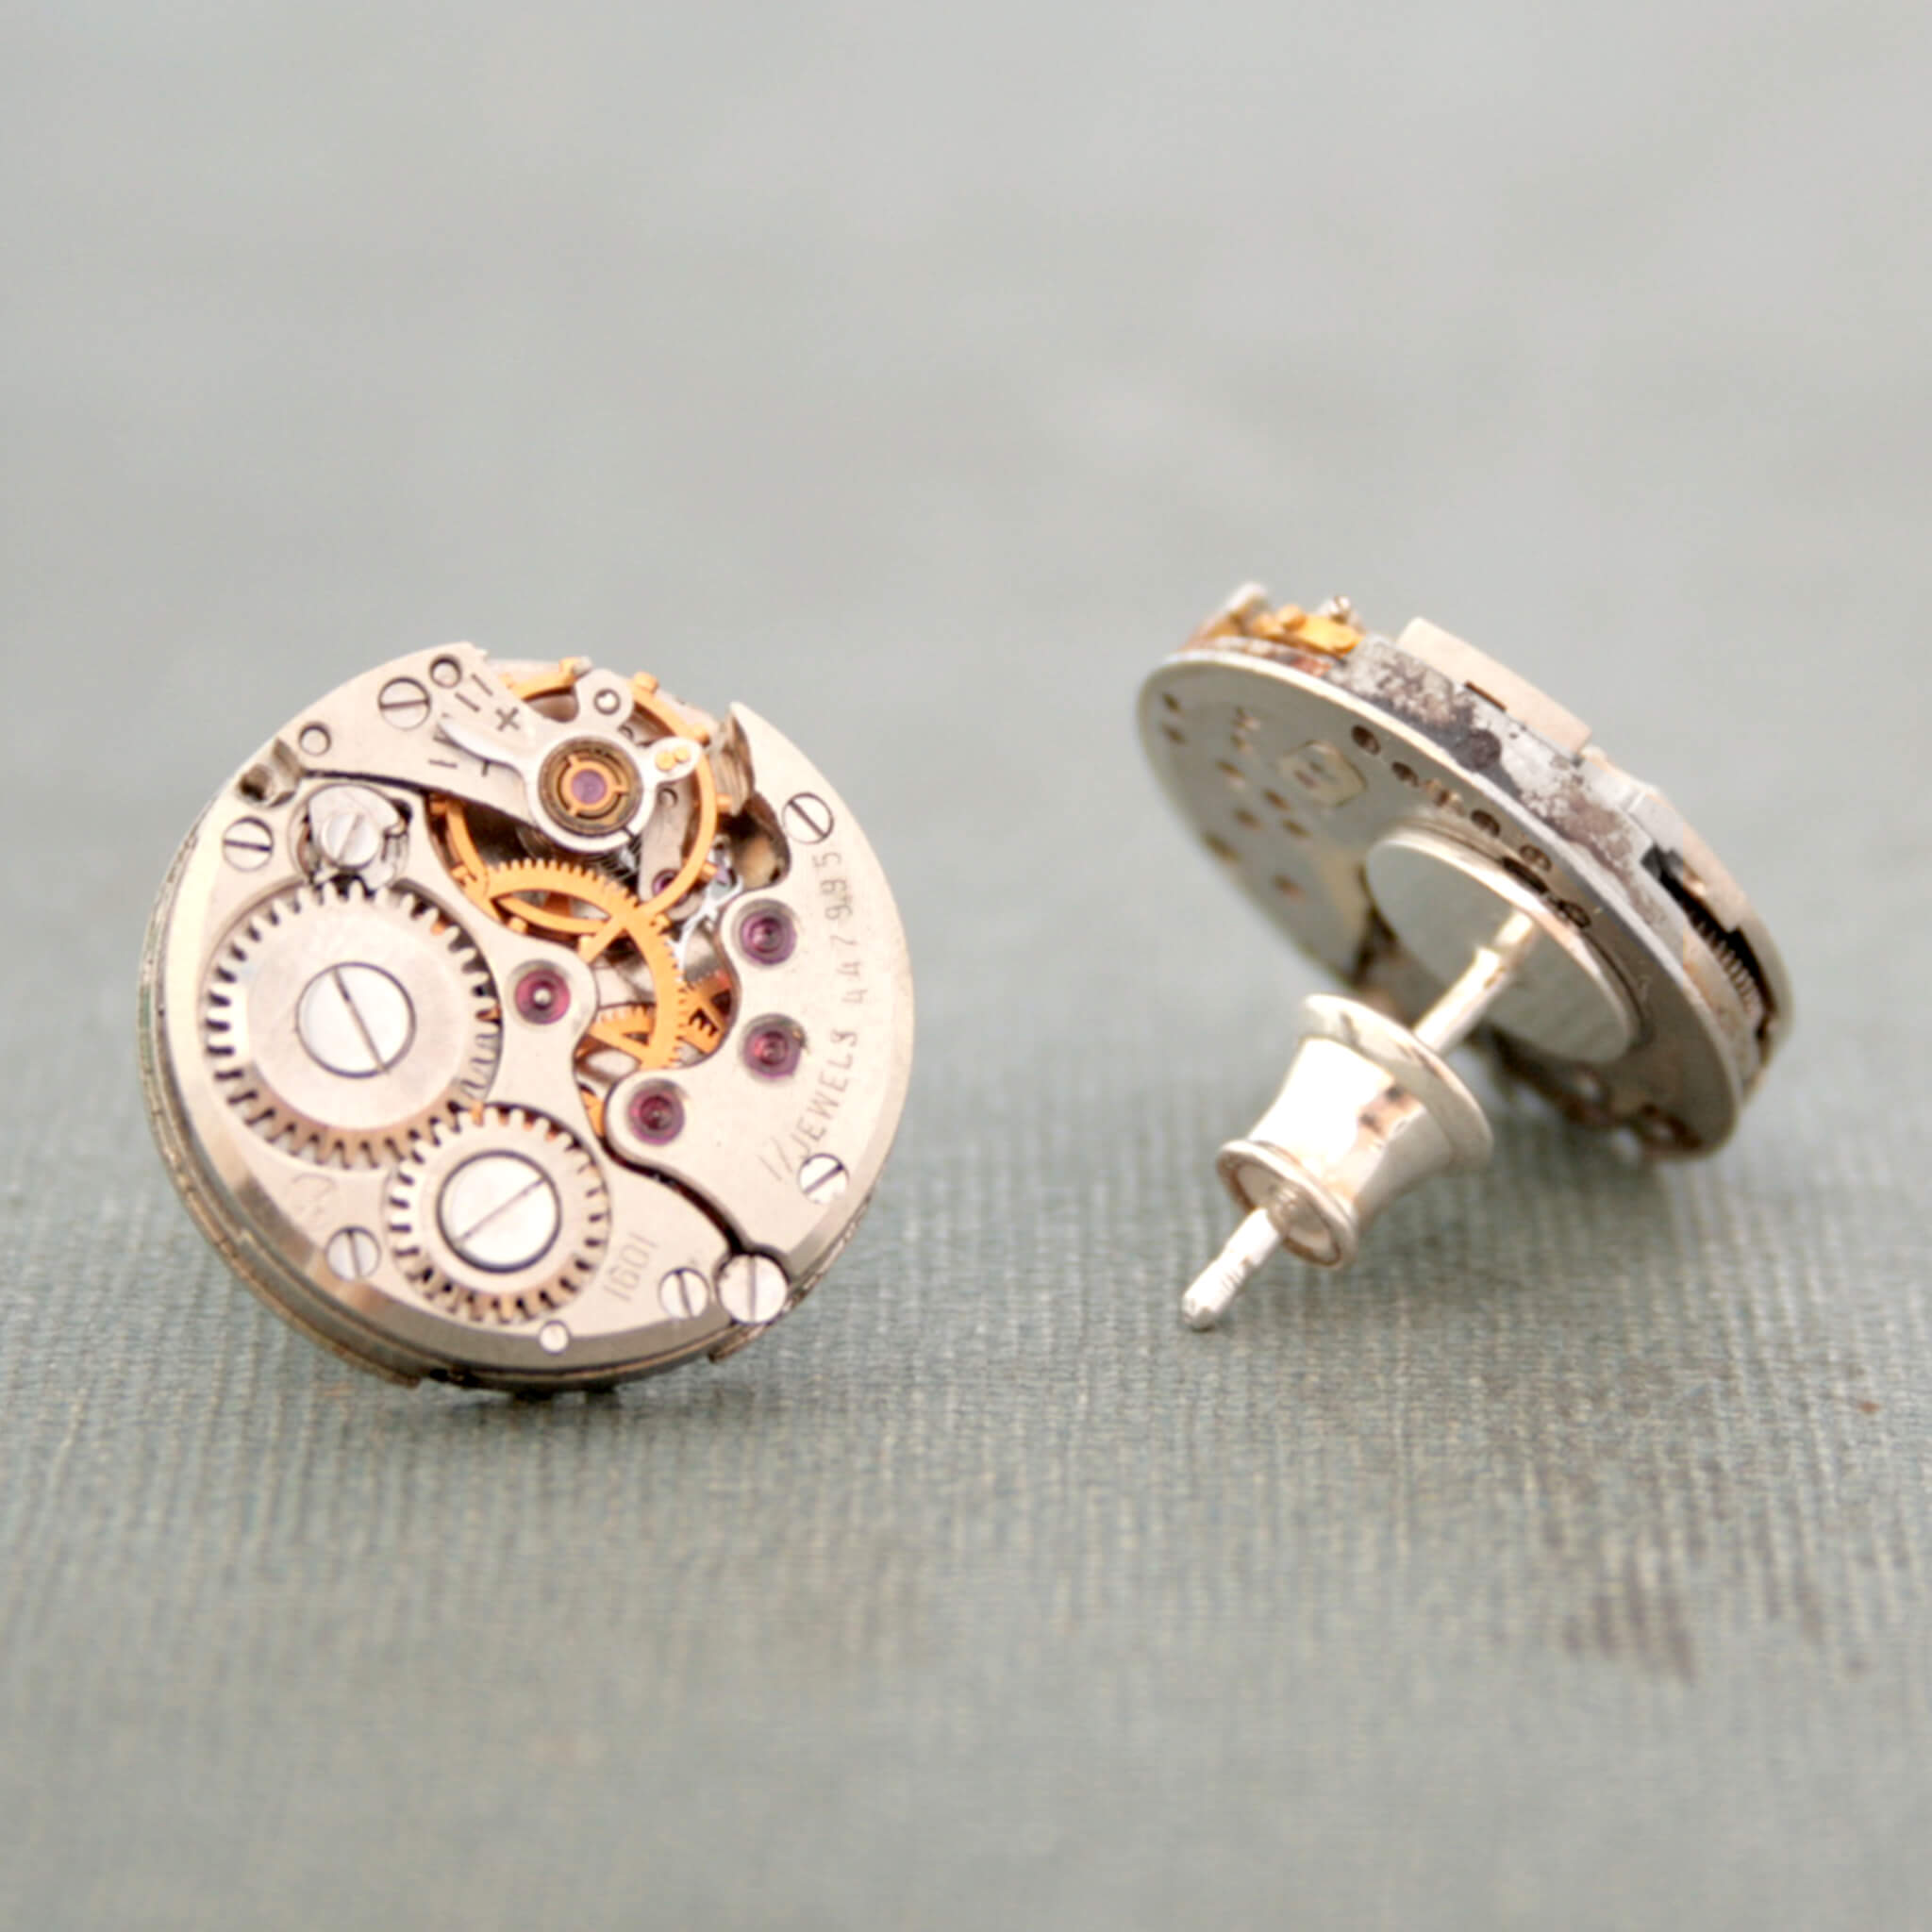 Round Watch movements turned into stud earrings lying on a vintage book